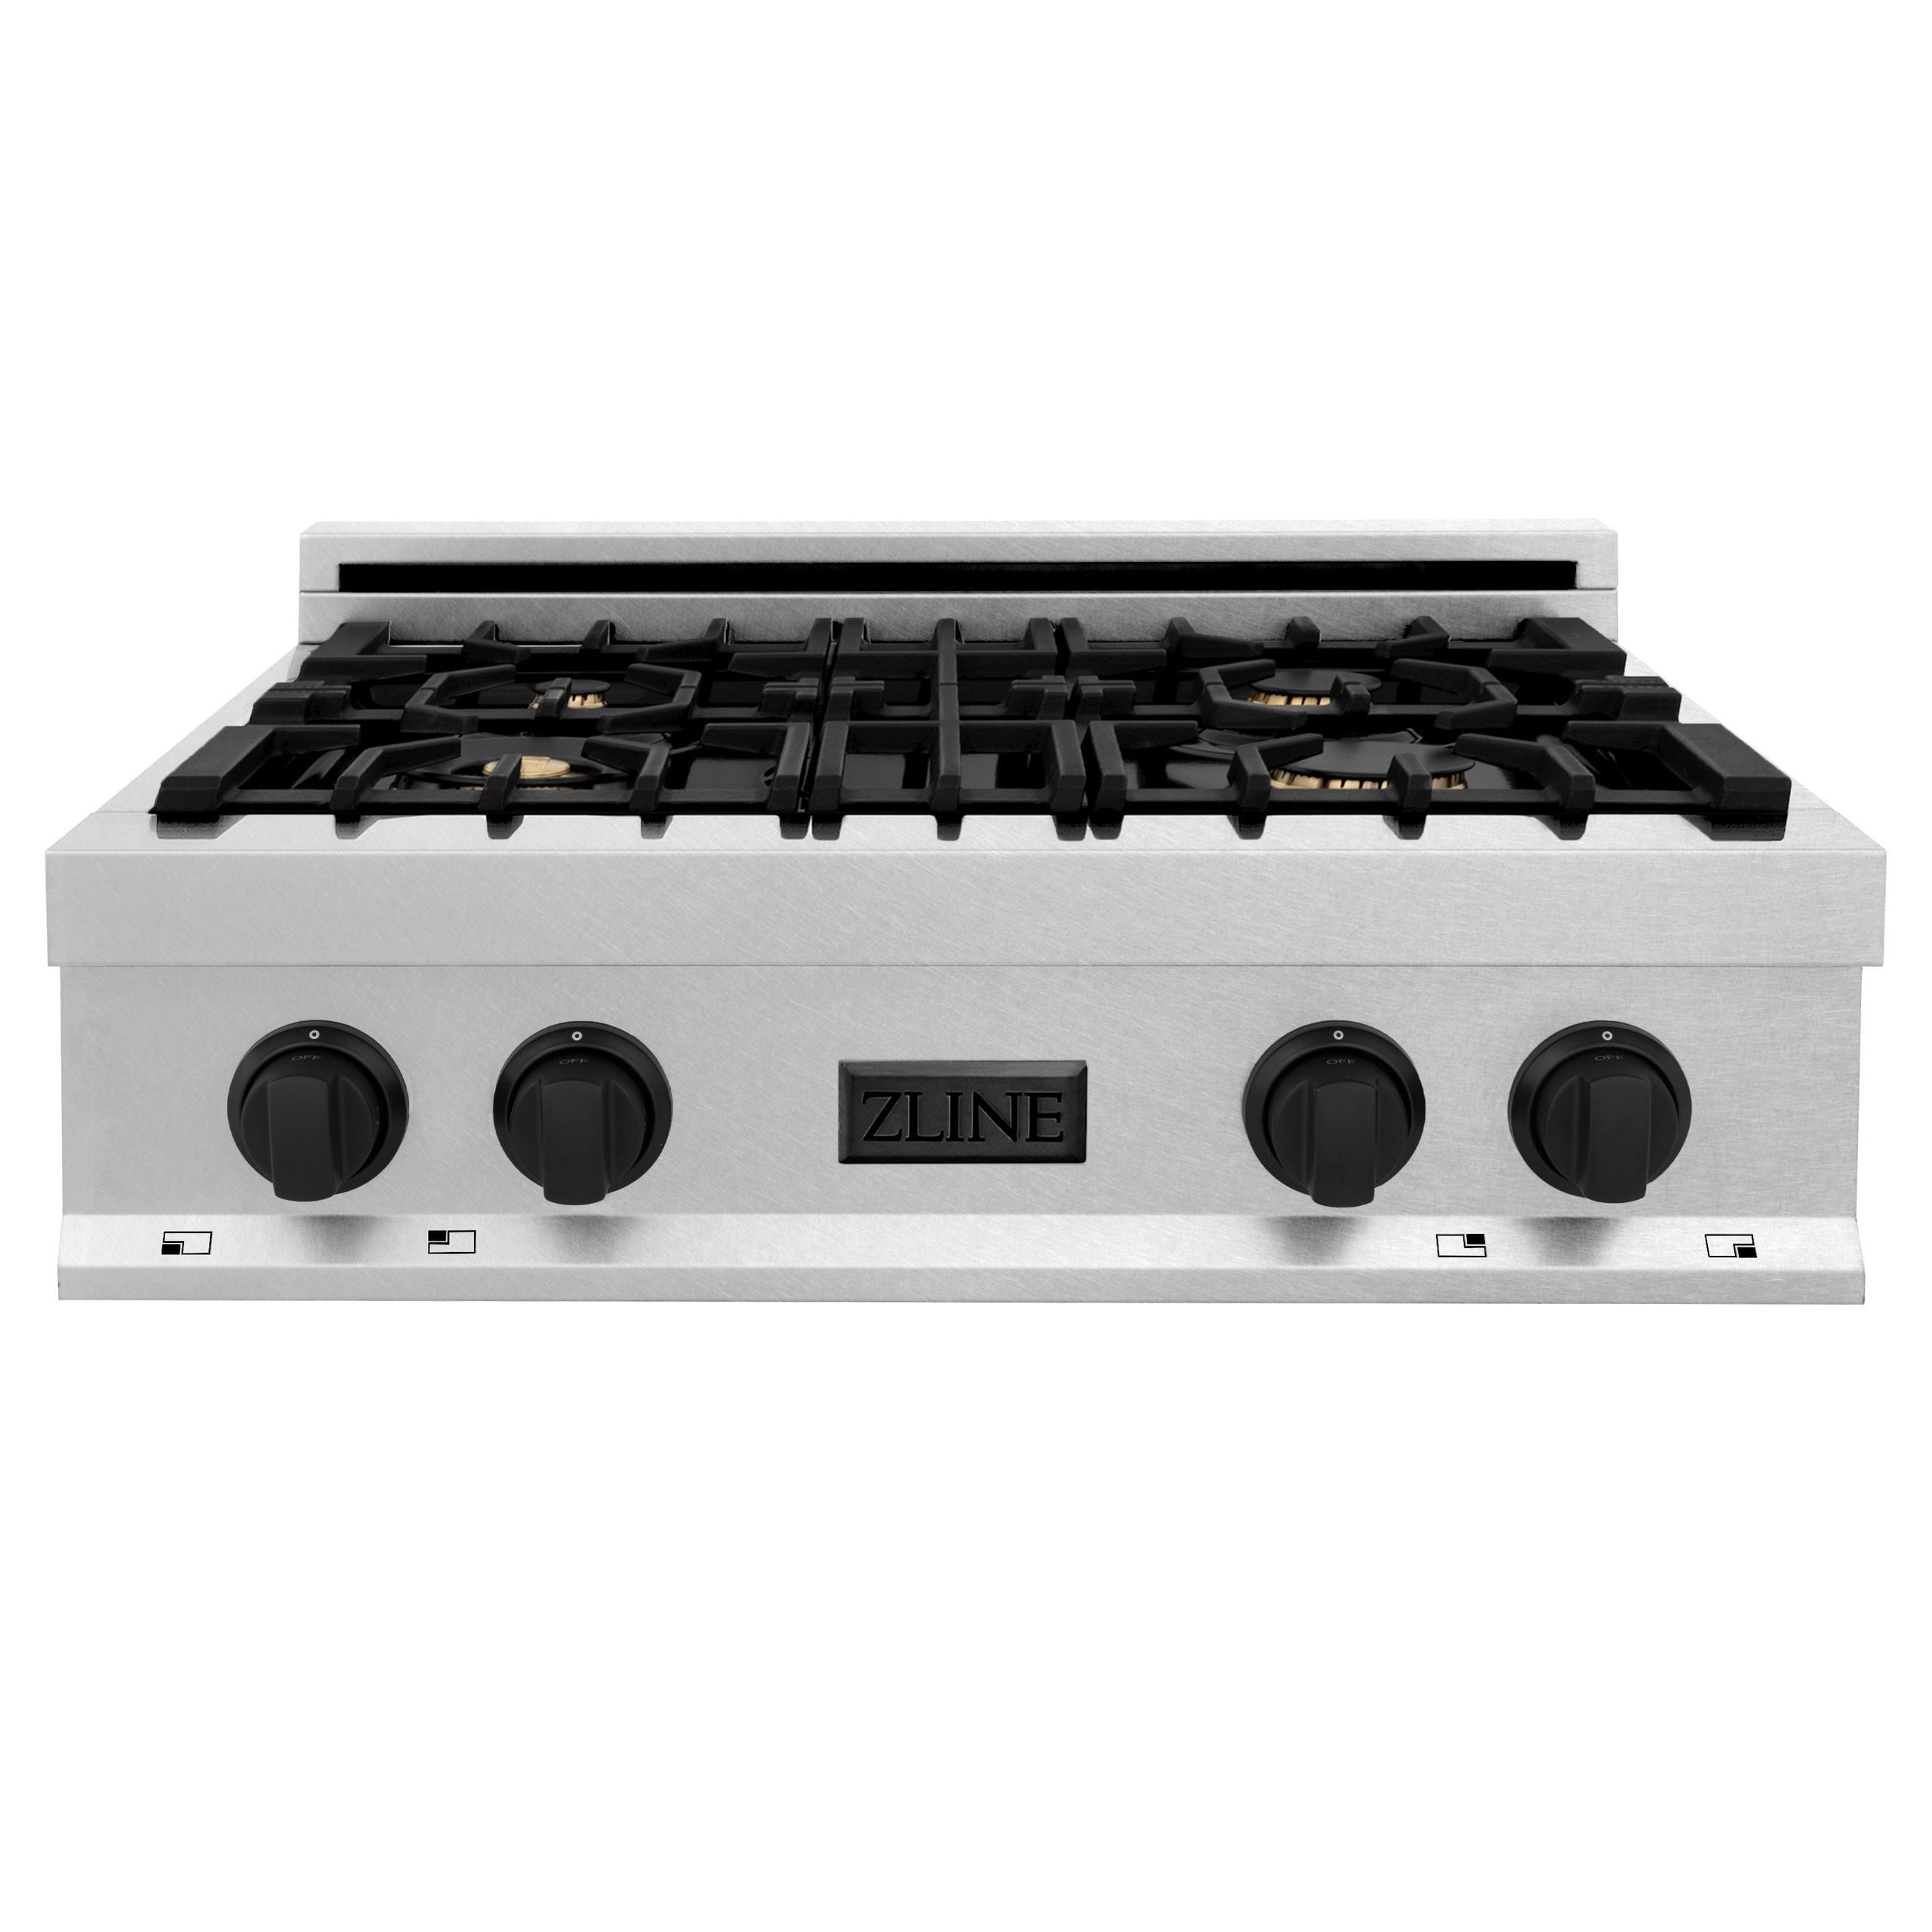 ZLINE KITCHEN AND BATH RTSZ30G ZLINE Autograph Edition 30" Porcelain Rangetop with 4 Gas Burners in DuraSnow R Stainless Steel and Accents Color: Gold